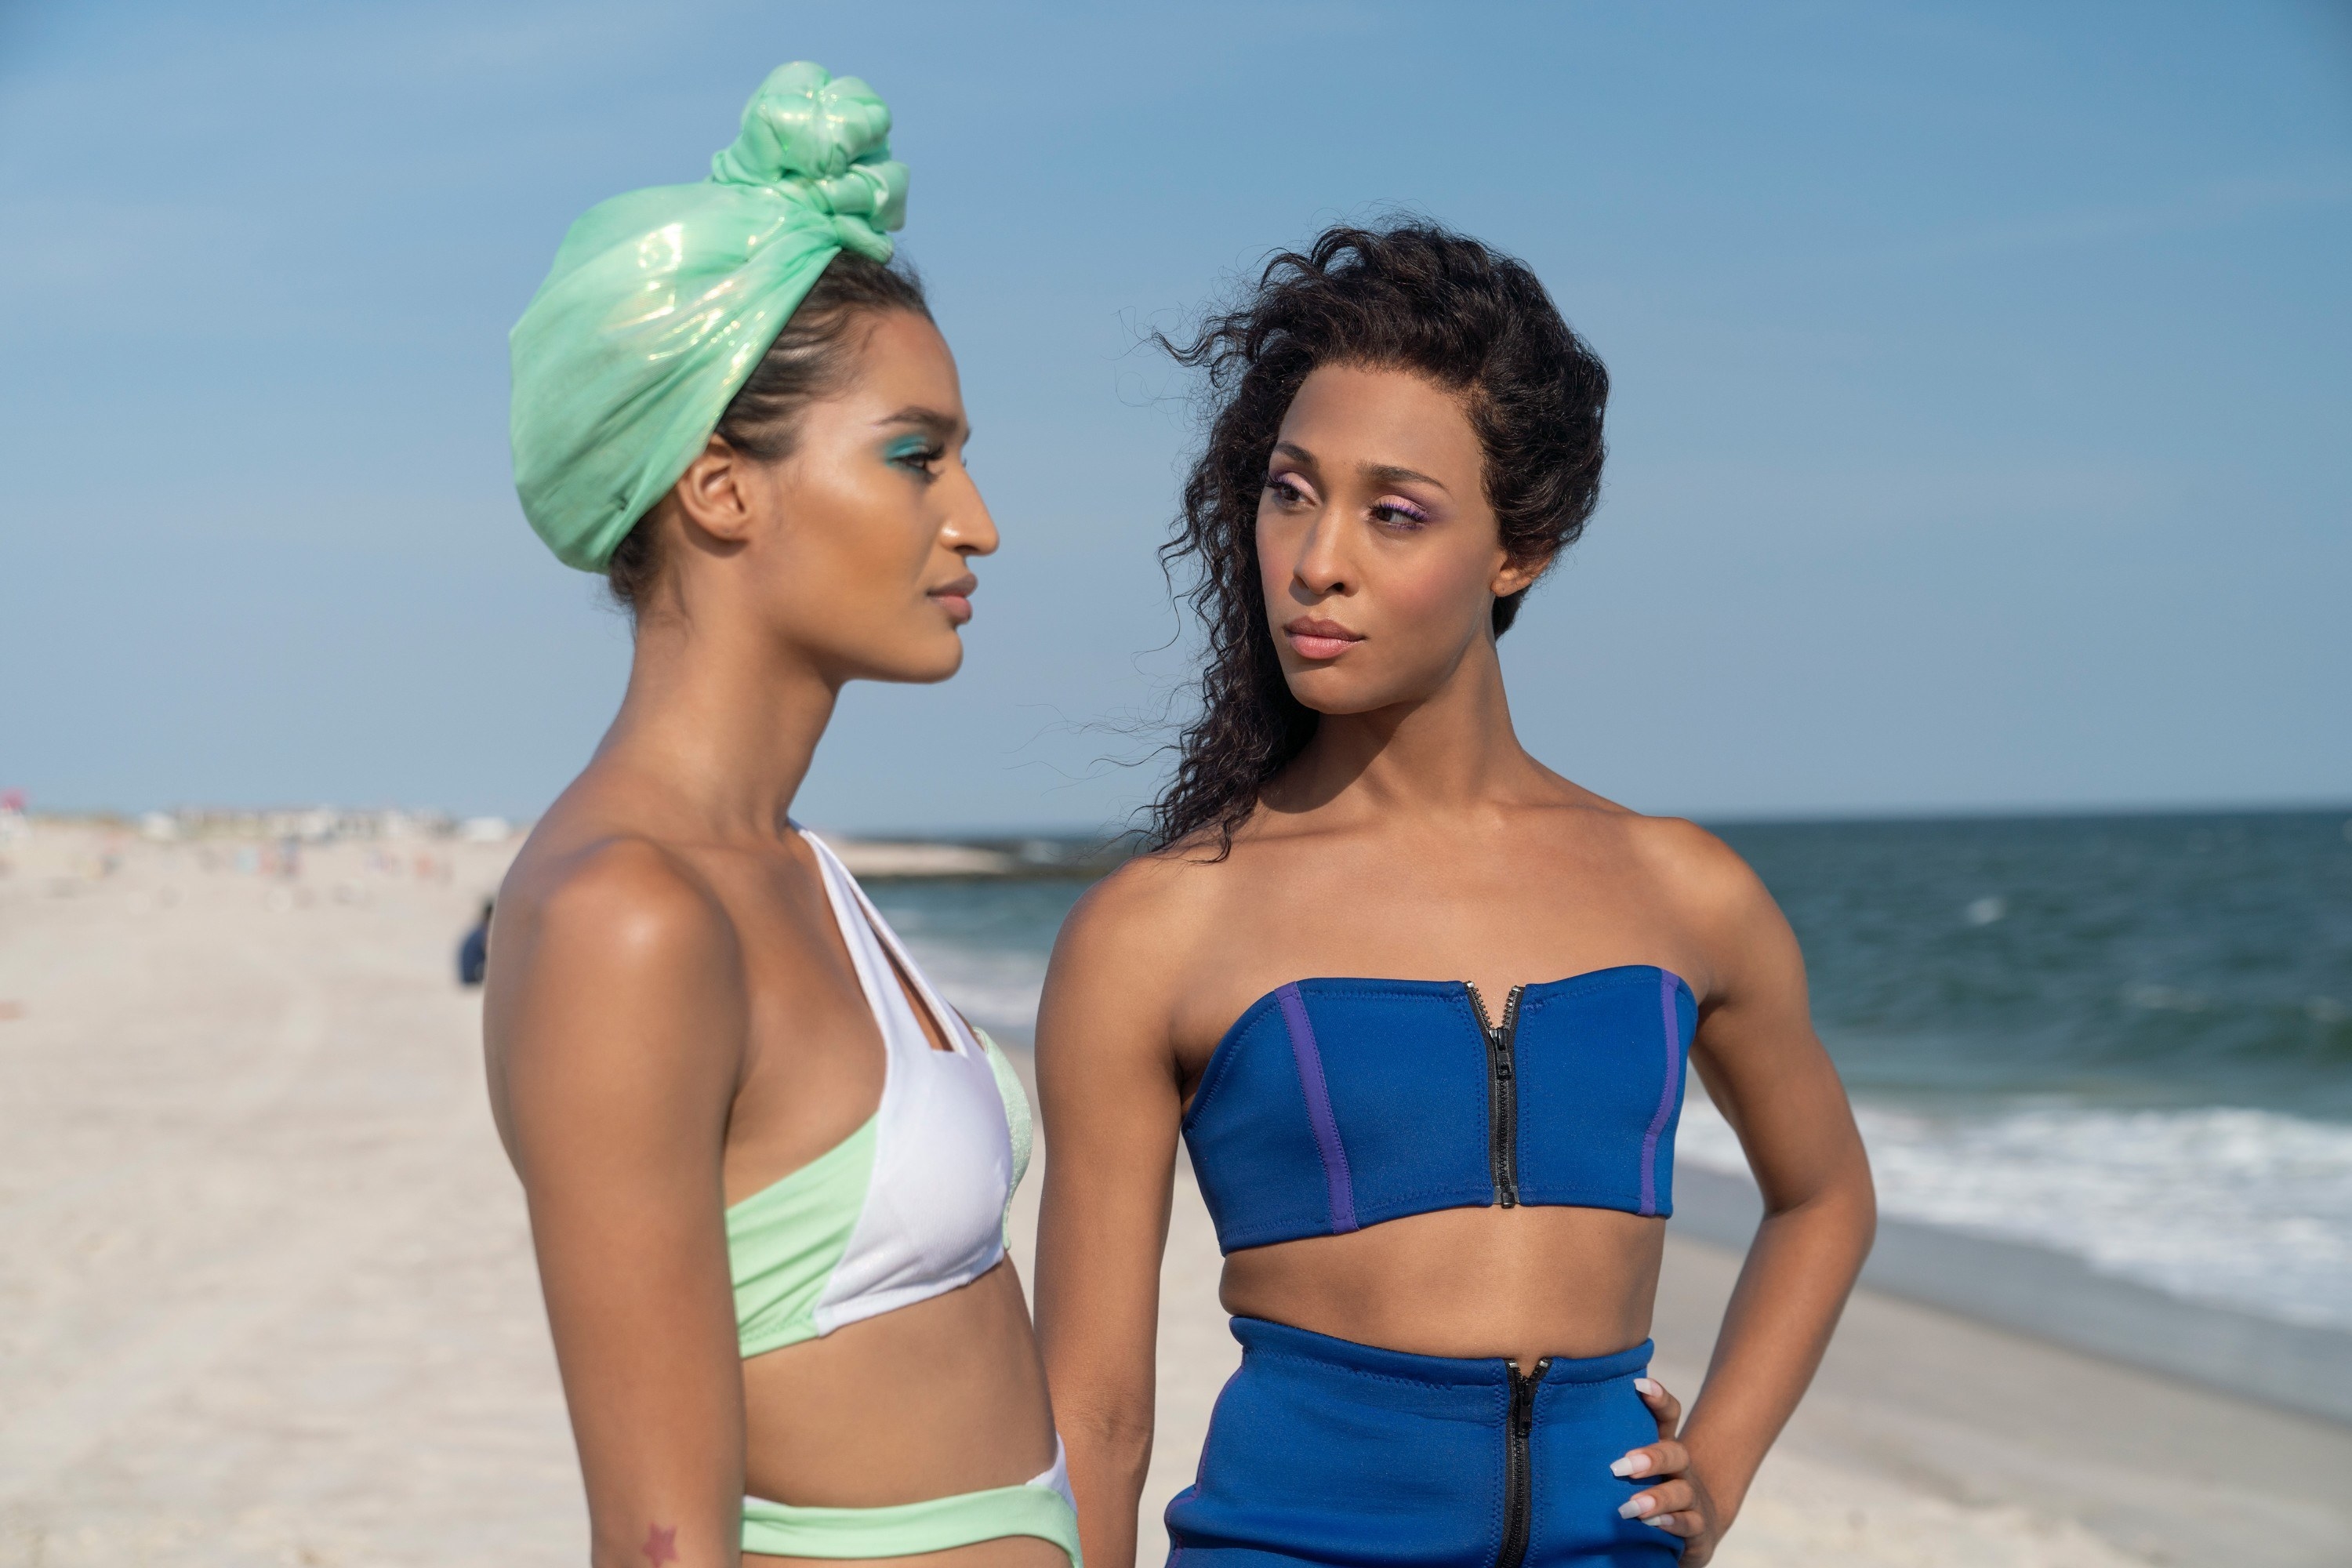 Indya Moore and Michaela Jae Rodriguez stand on a beach